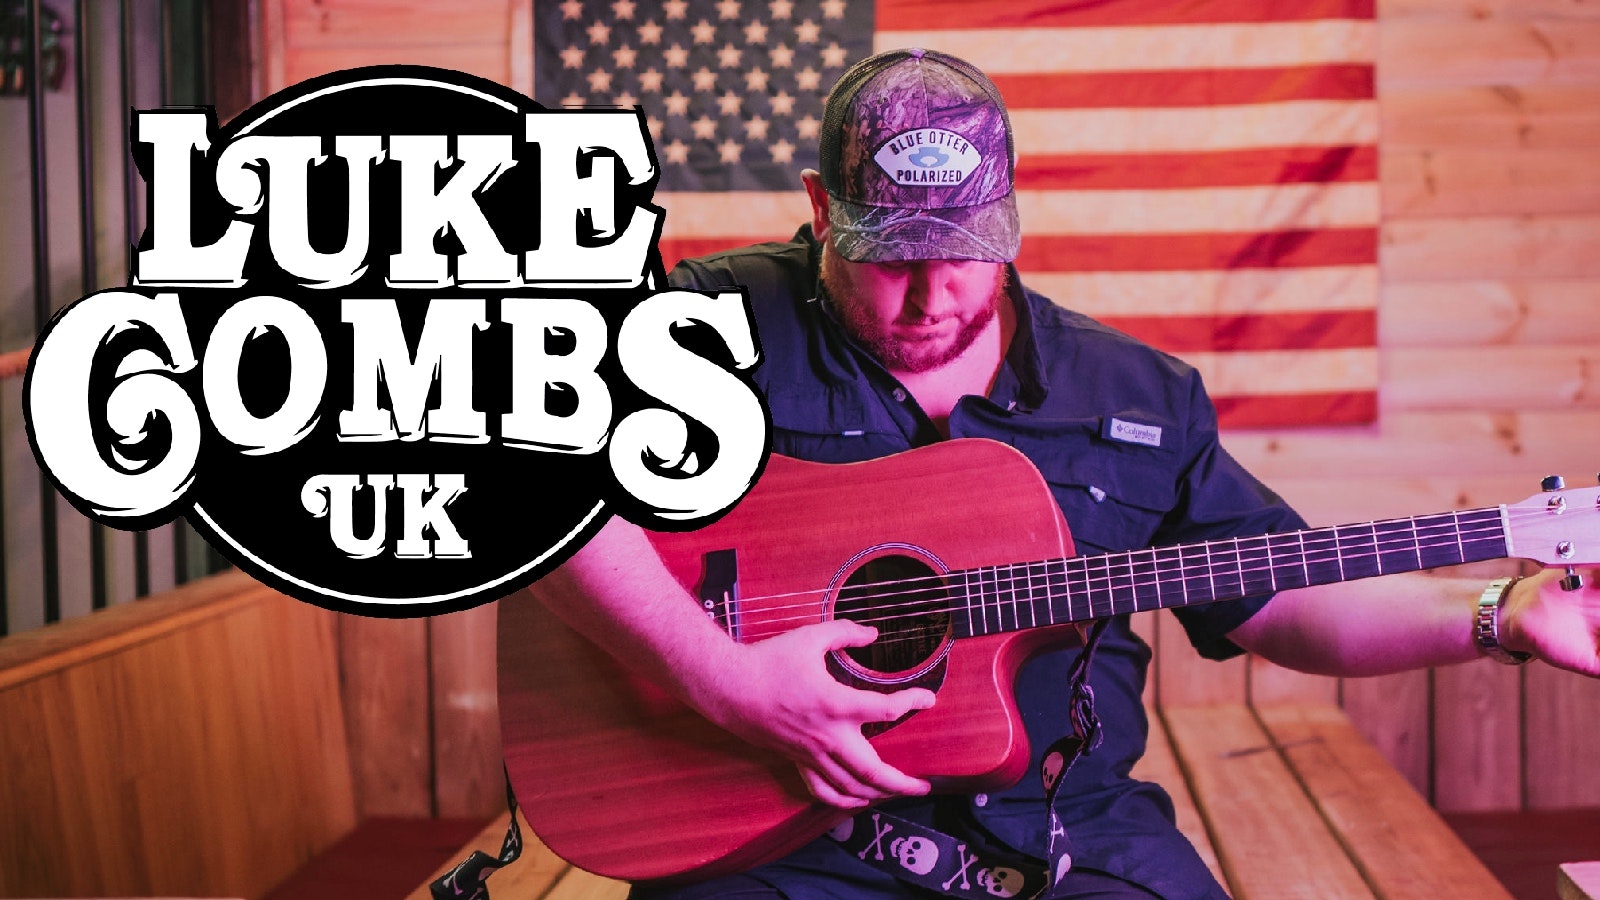 🤠 Luke Combs UK Tribute in concert + special guest  ⭐️⭐️⭐️⭐️⭐️